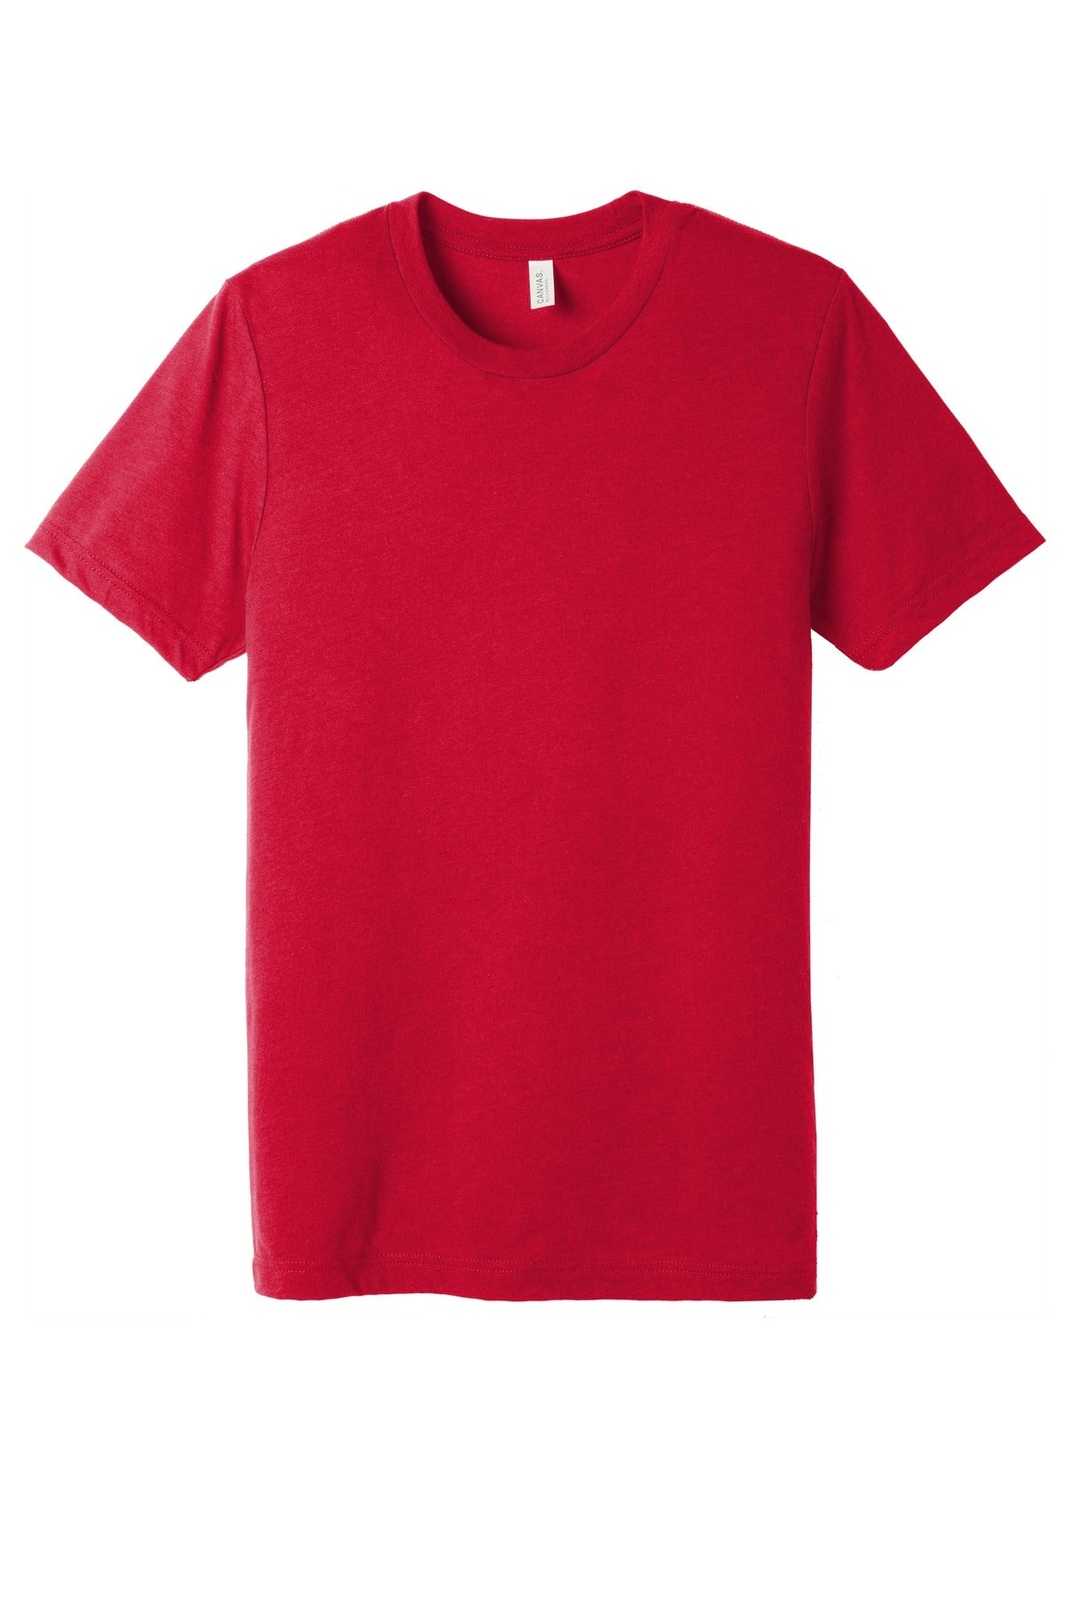 Bella + Canvas 3413 Unisex Triblend Short Sleeve Tee - Solid Red Triblend - HIT a Double